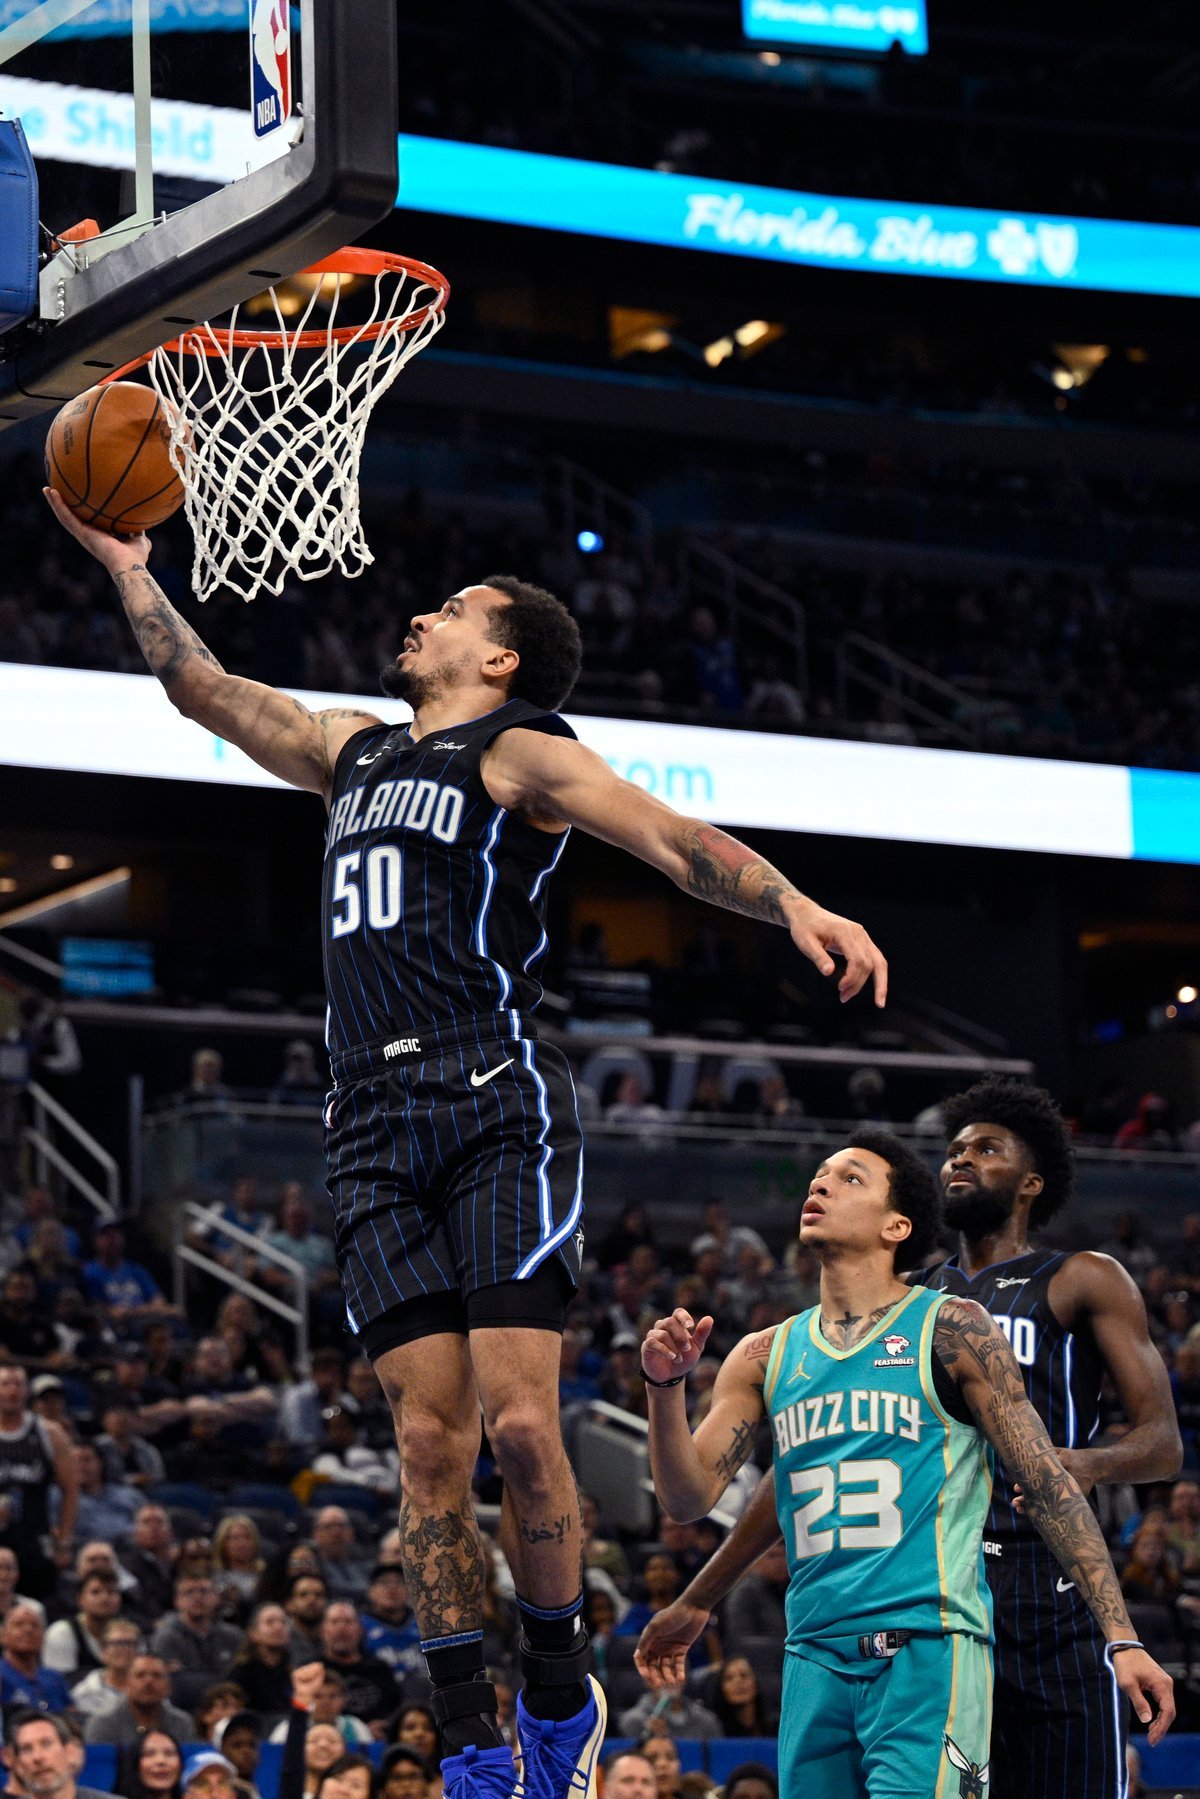 Magic clinch a play-in spot in 112-92 win over Hornets